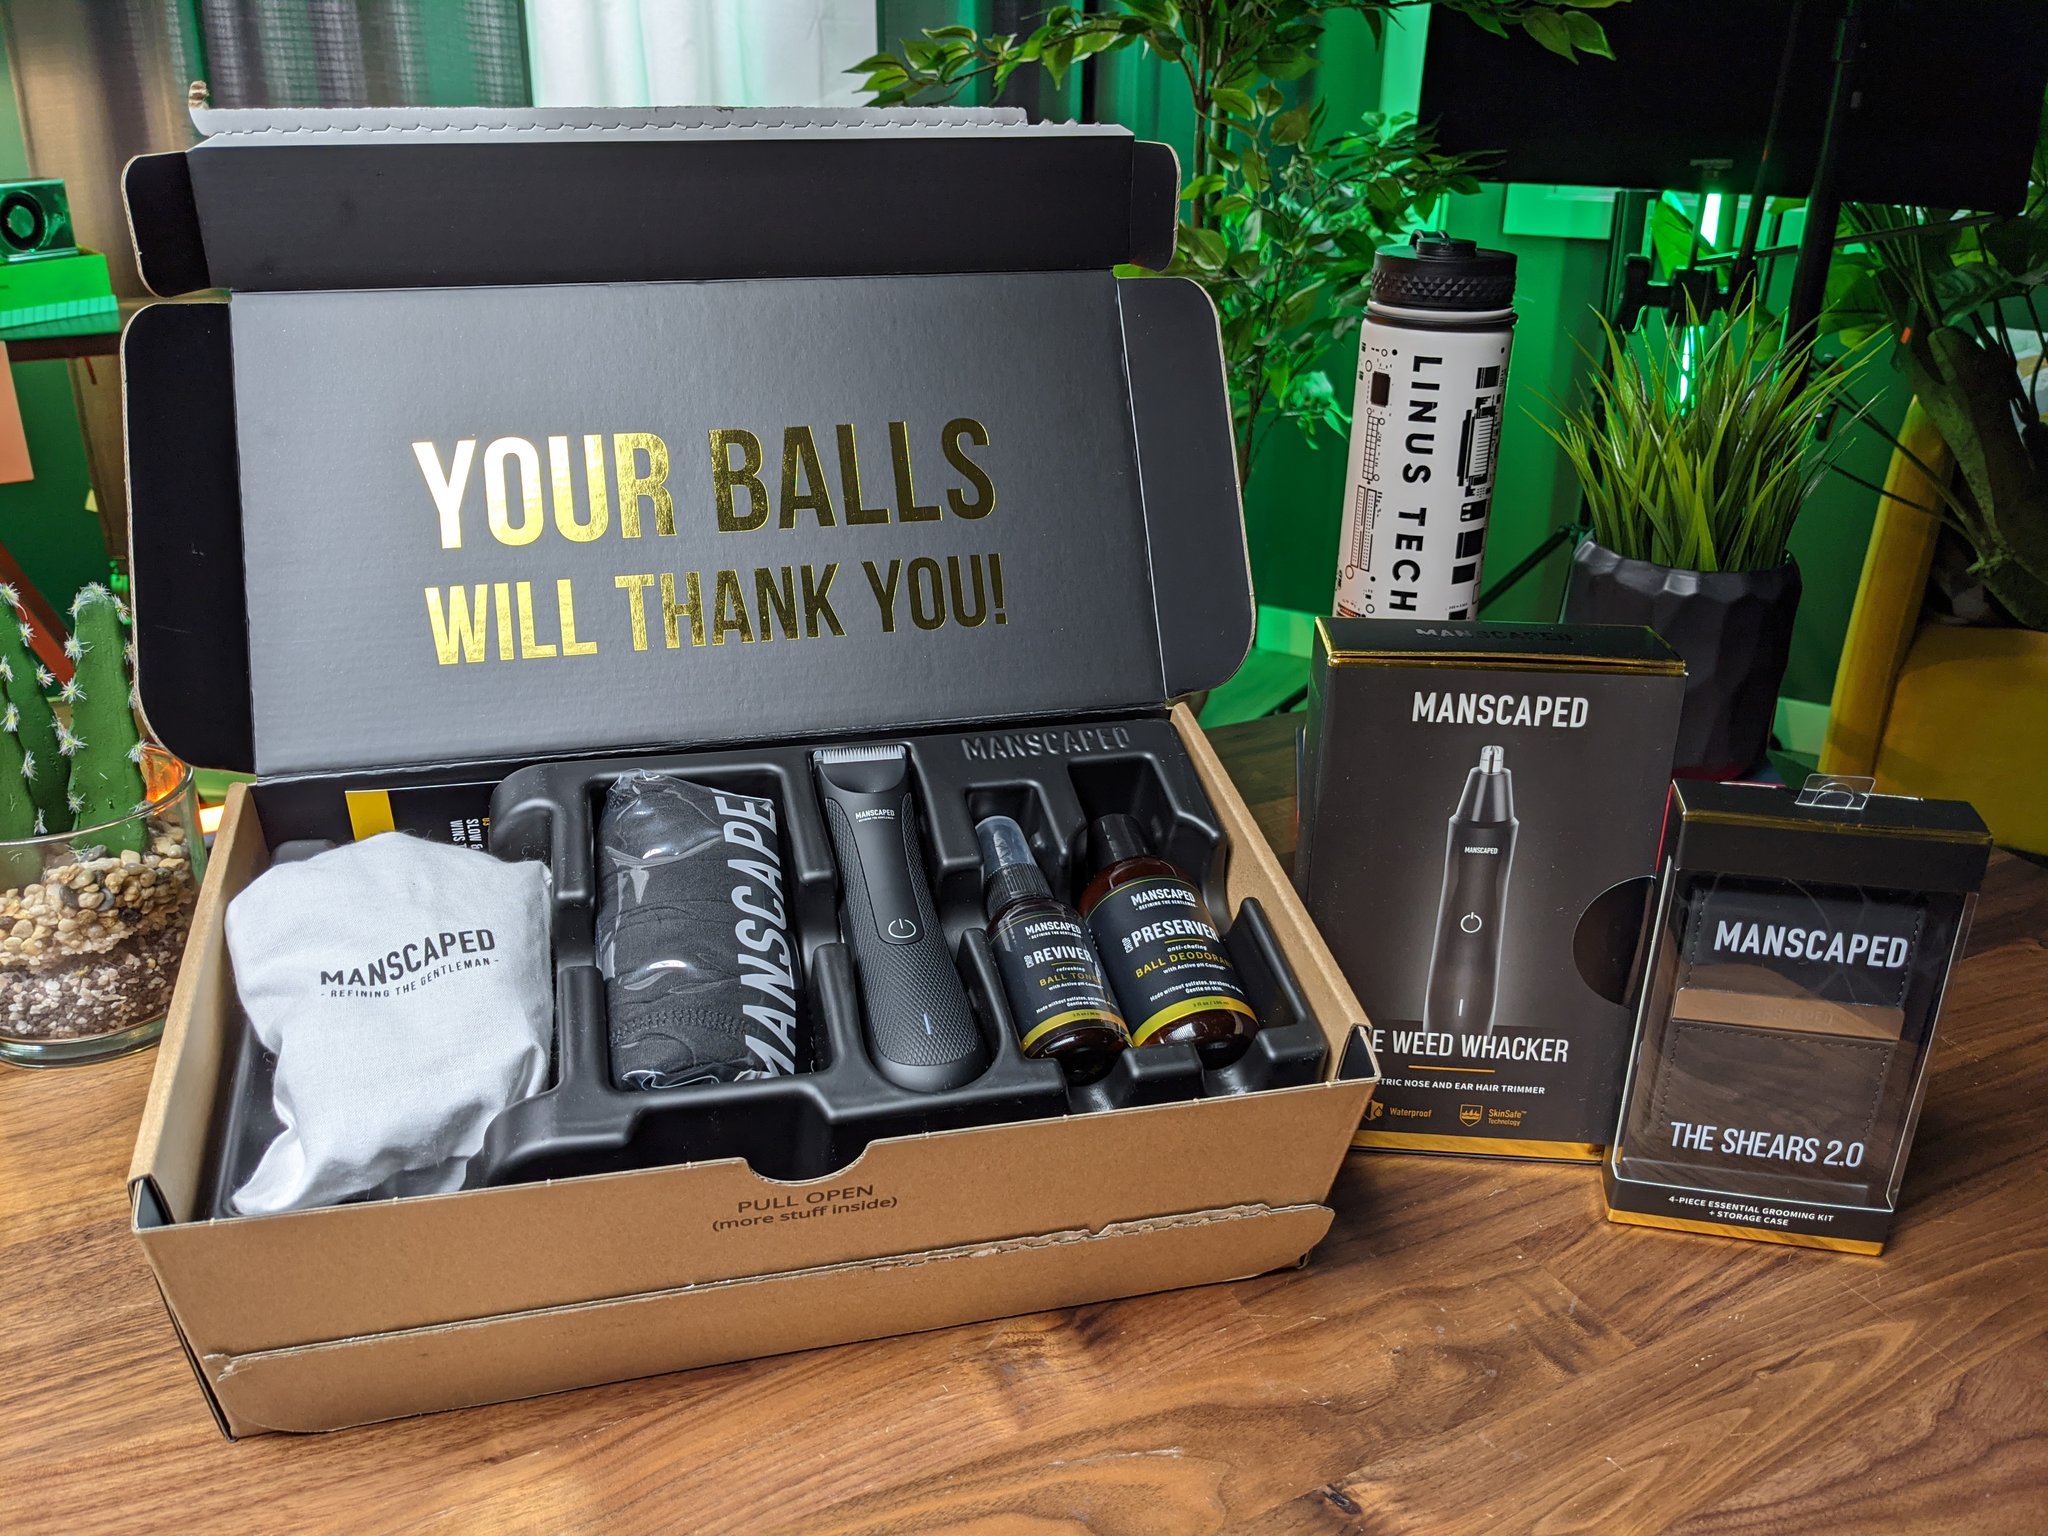 Linus Tech Tips Twitter: "No, thank @manscaped sponsoring this post. This is their Performance Package, and you can get 20% OFF + Free International Shipping + 2 FREE Gifts